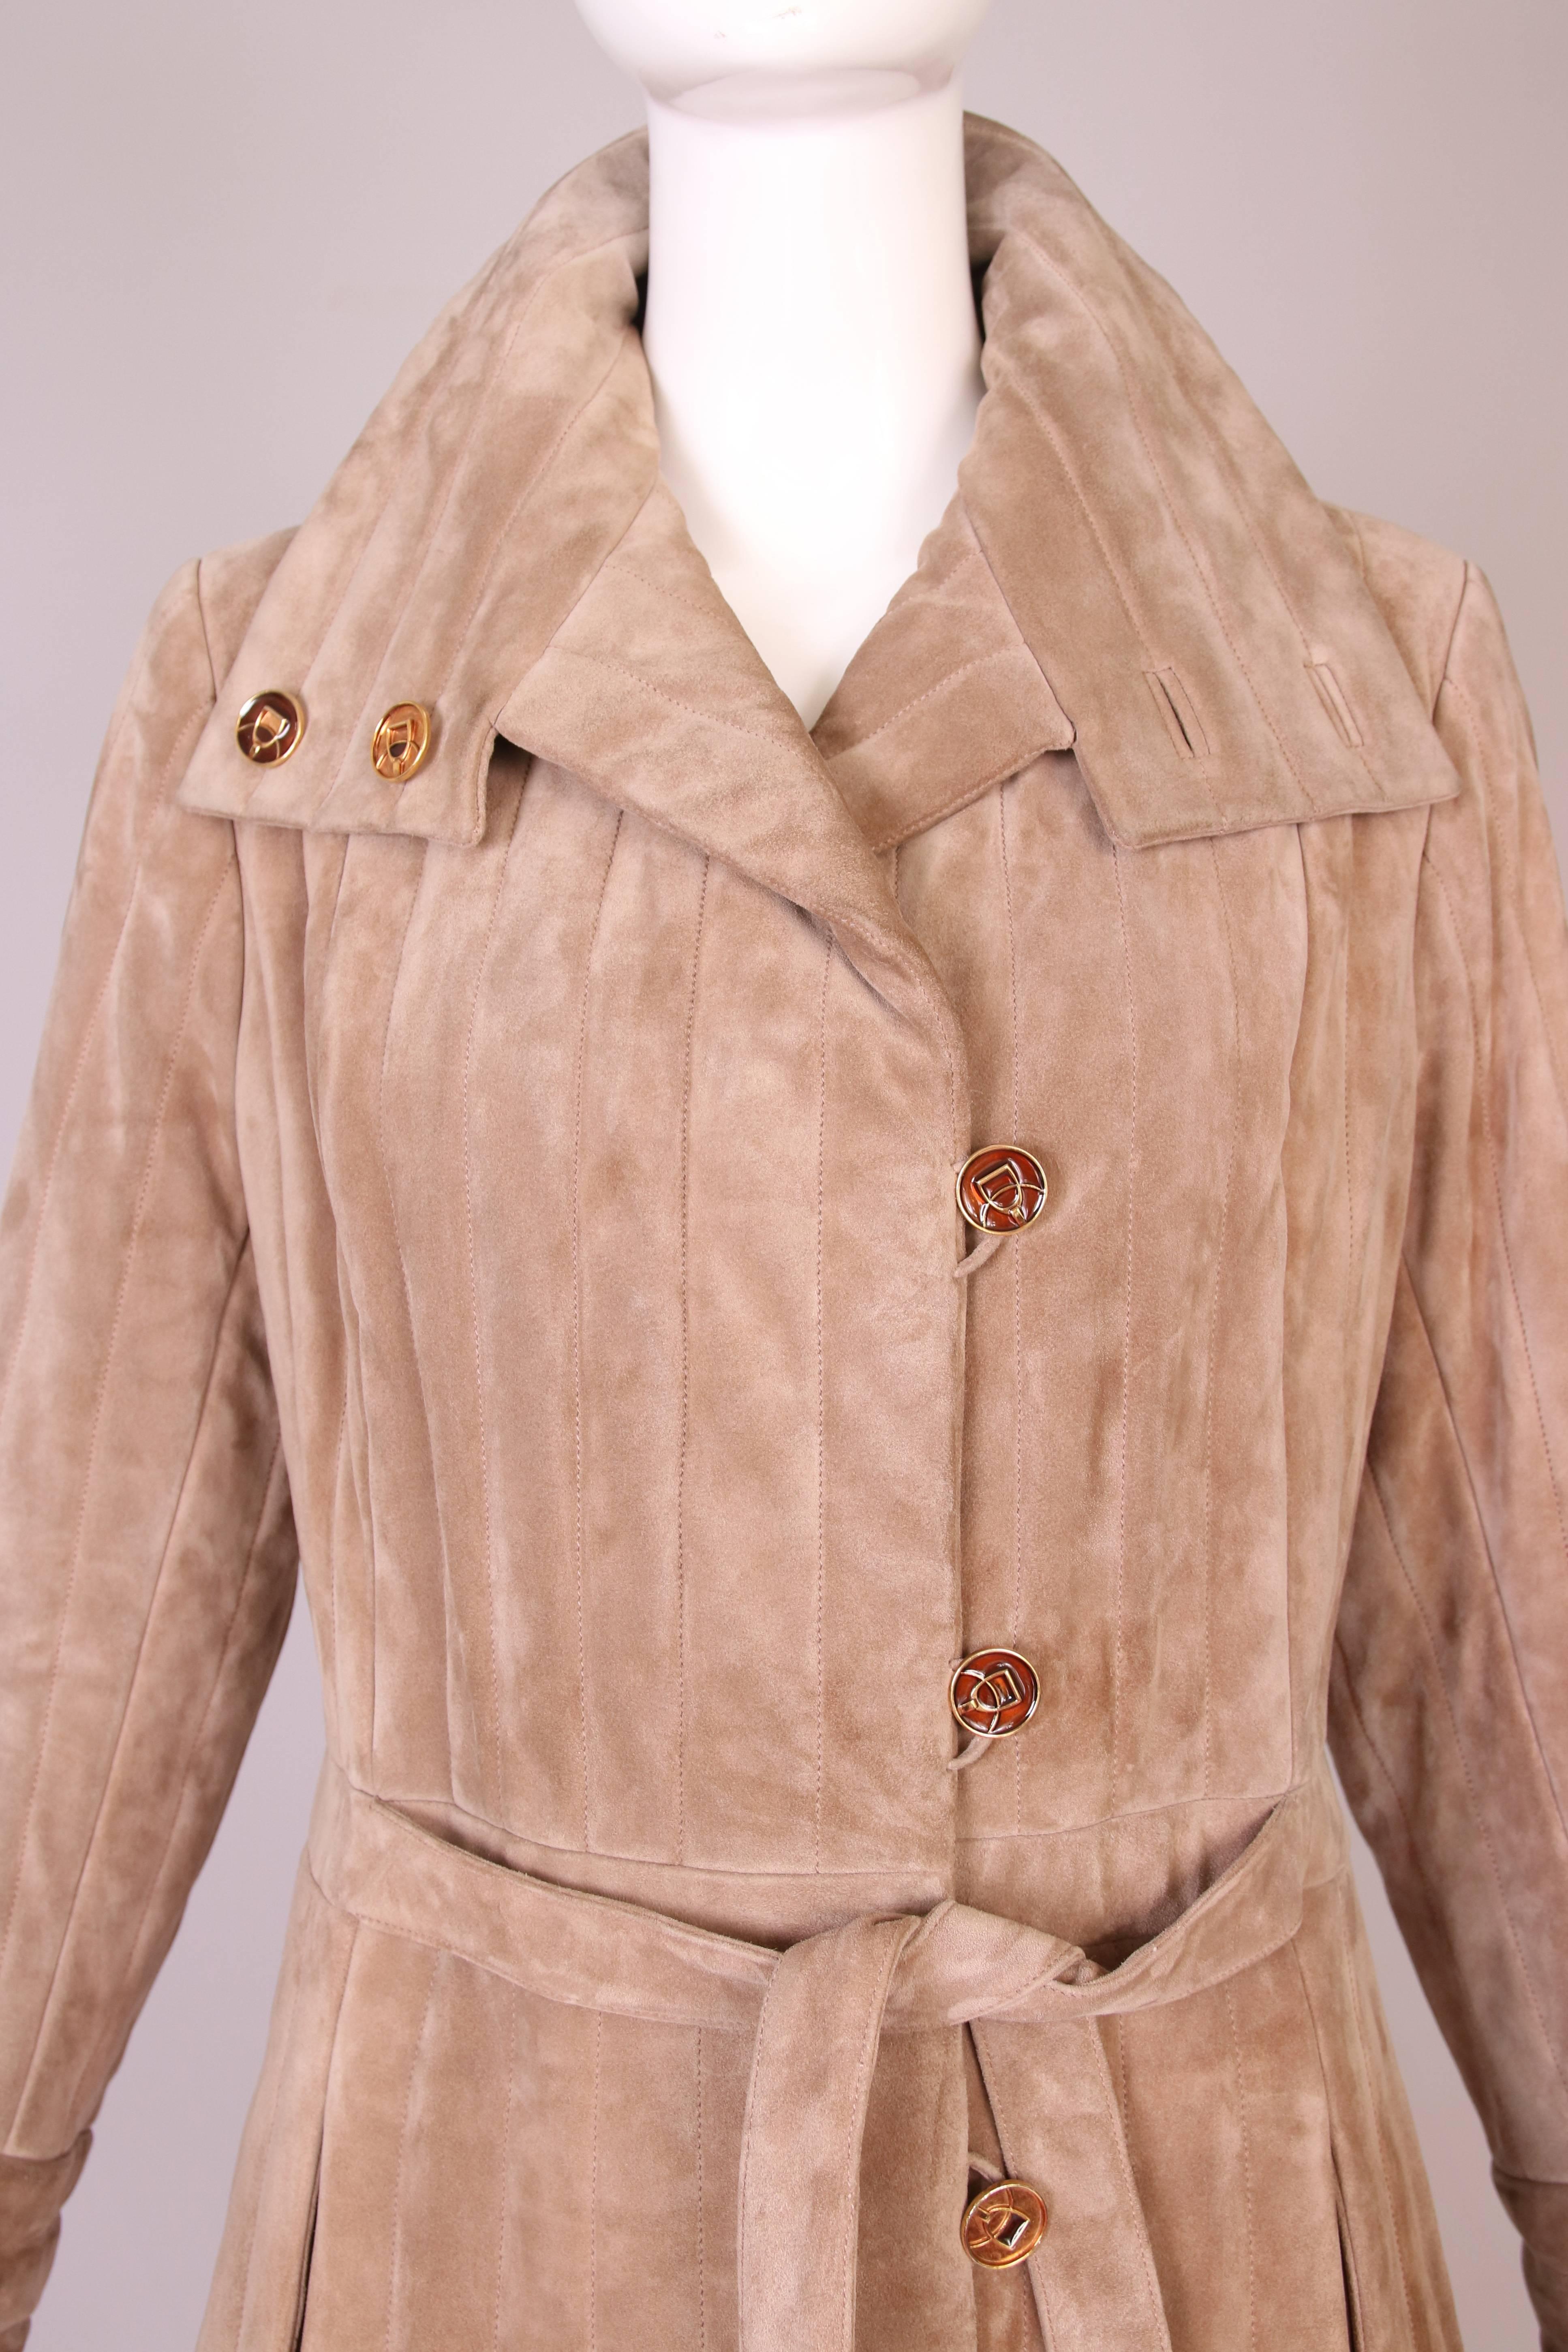 Women's 1970's Gucci Quilted Suede Coat w/Enameled Buttons & Attached Belt 